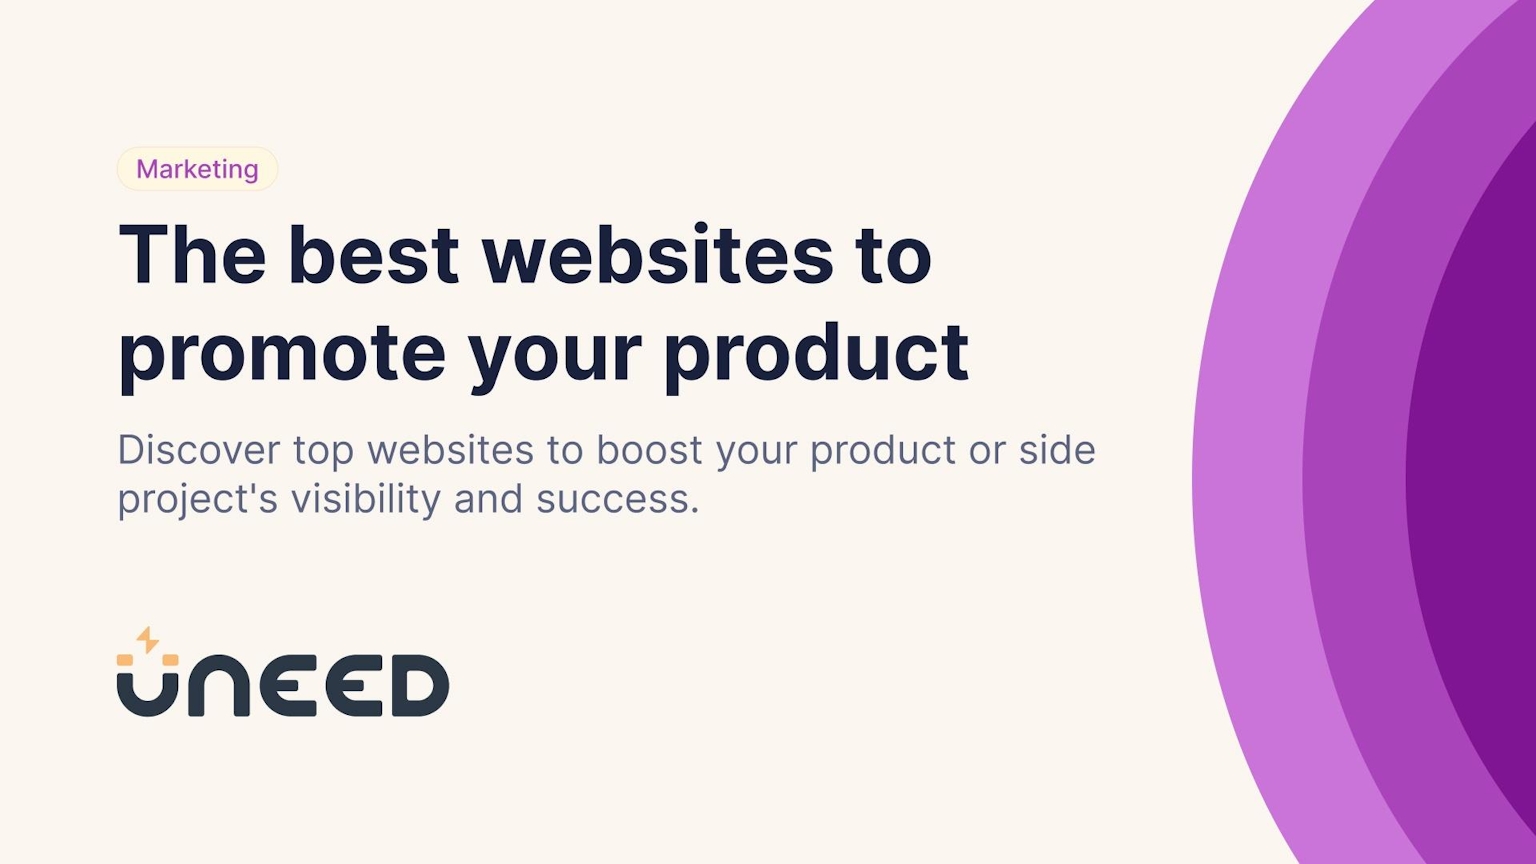 The best websites to promote your product